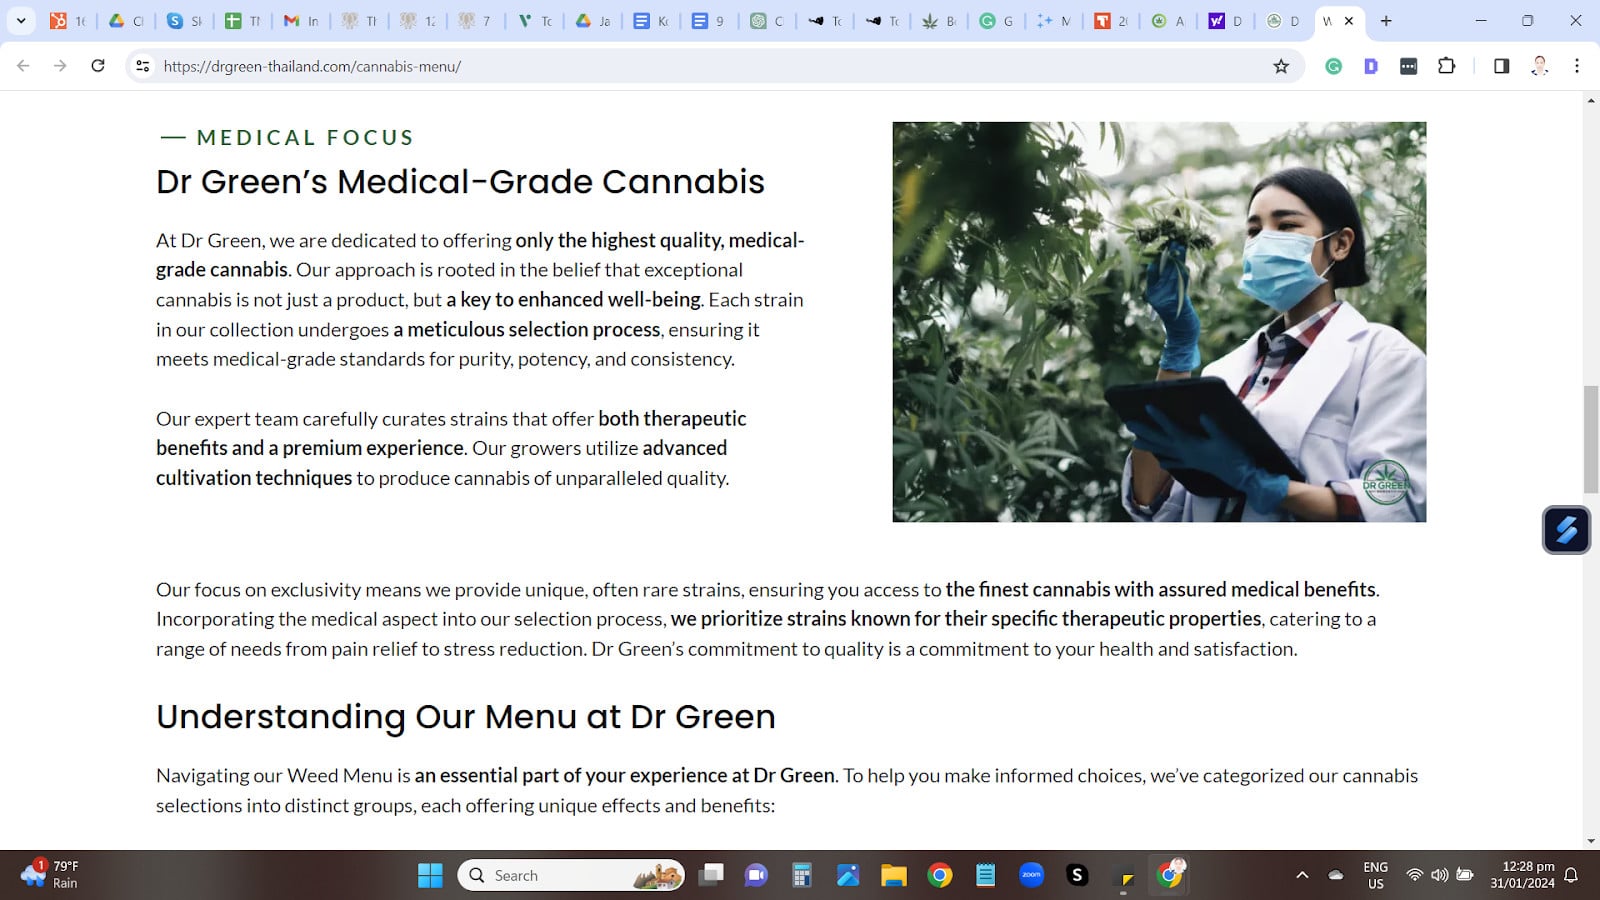 The Menu page of Dr. Green’s website emphasizes its commitment to producing high-quality medical-grade cannabis that primarily focuses on the health and therapeutic effects of the strains.